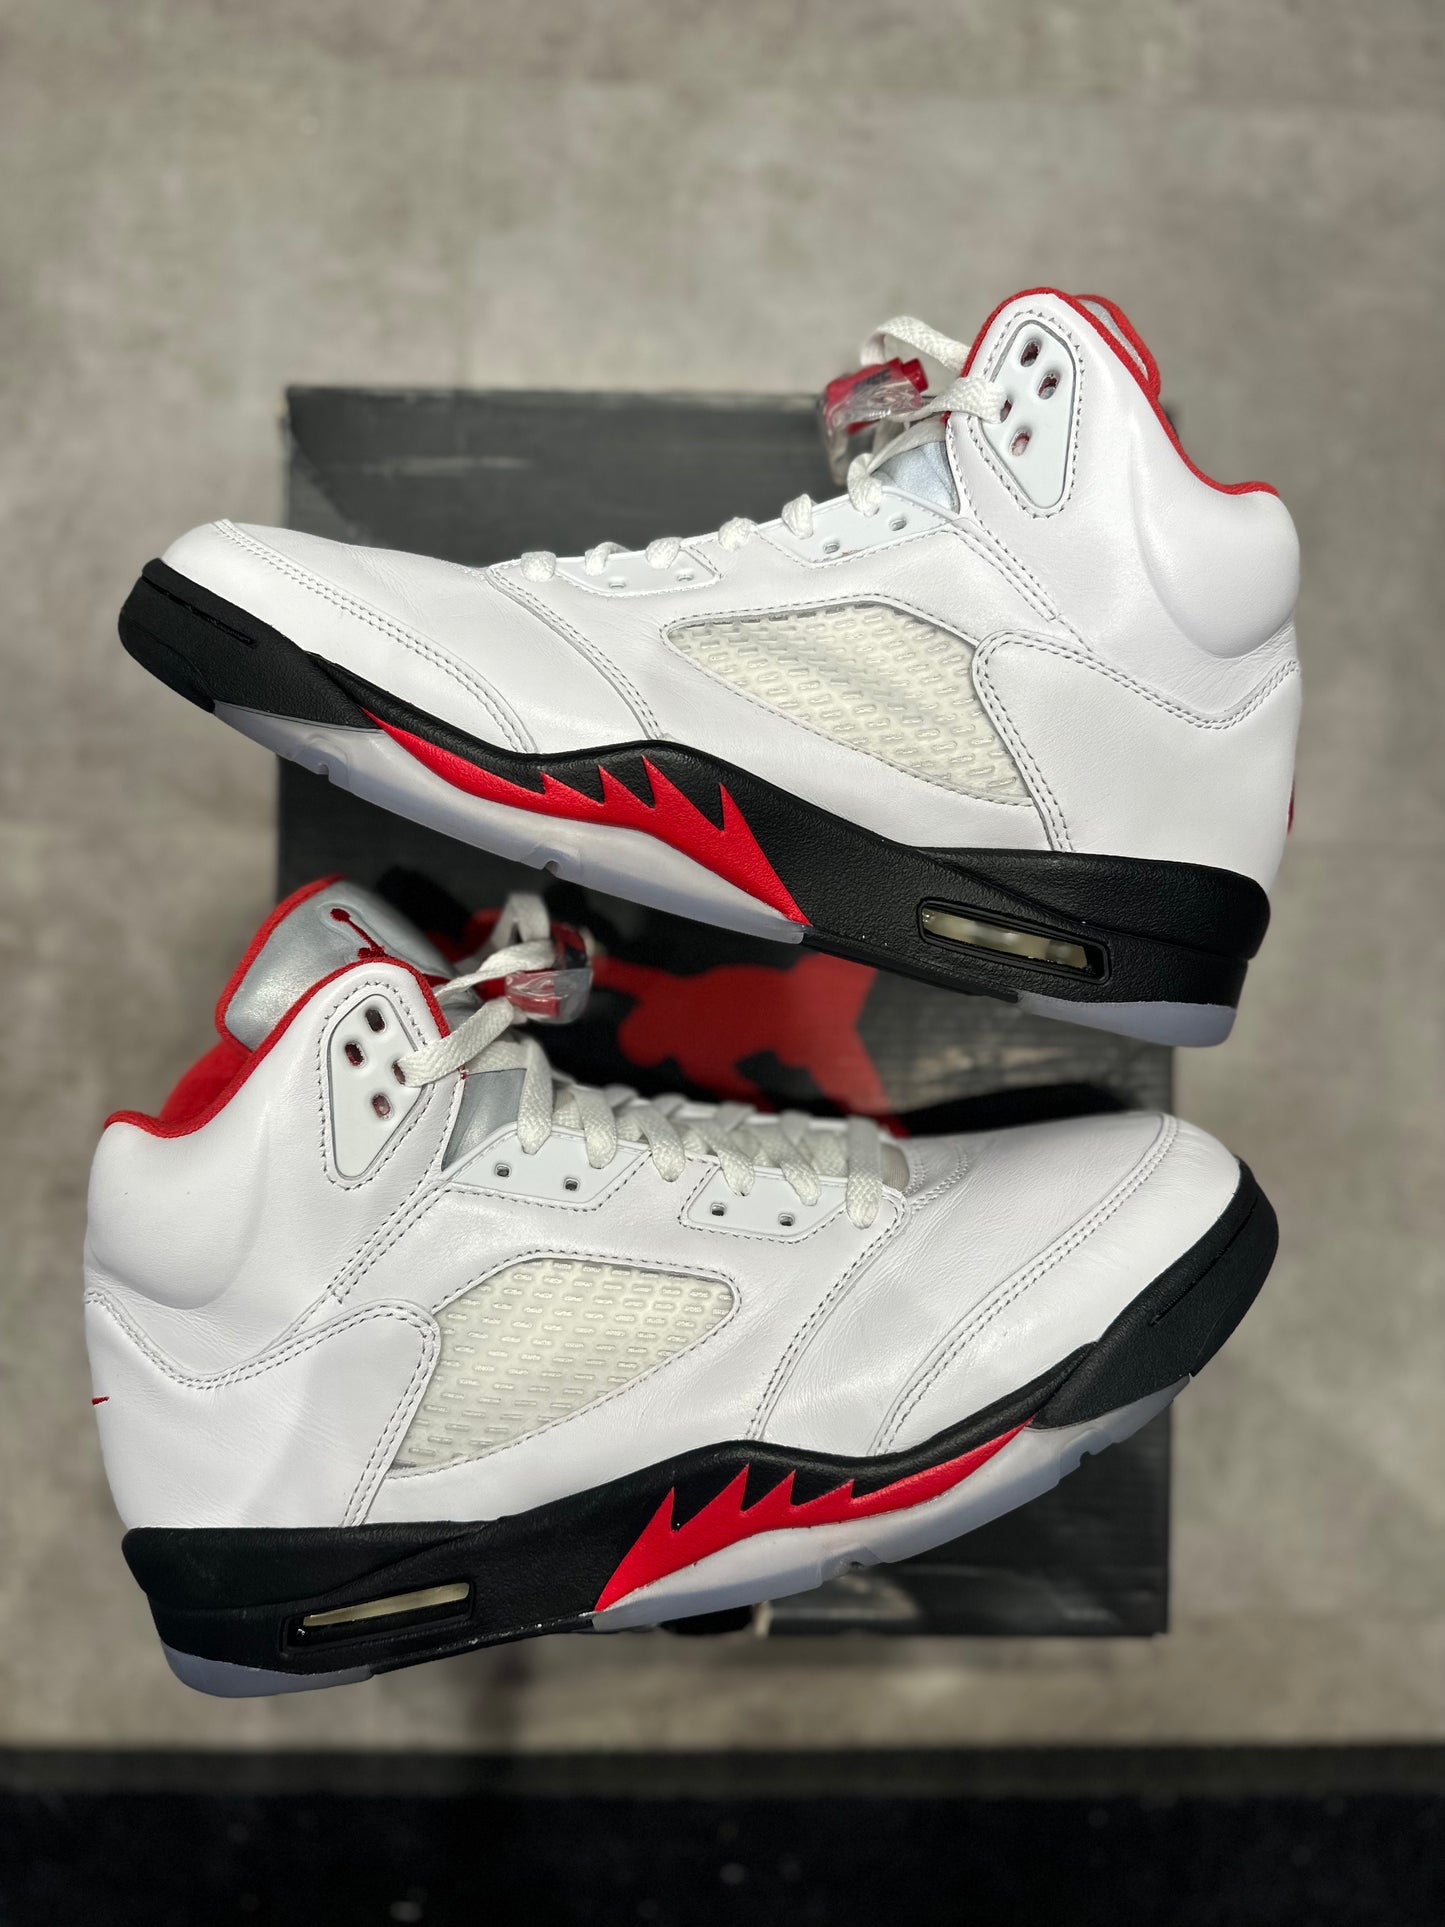 Jordan 5 Retro Fire Red (2020) (Preowned Size 11)